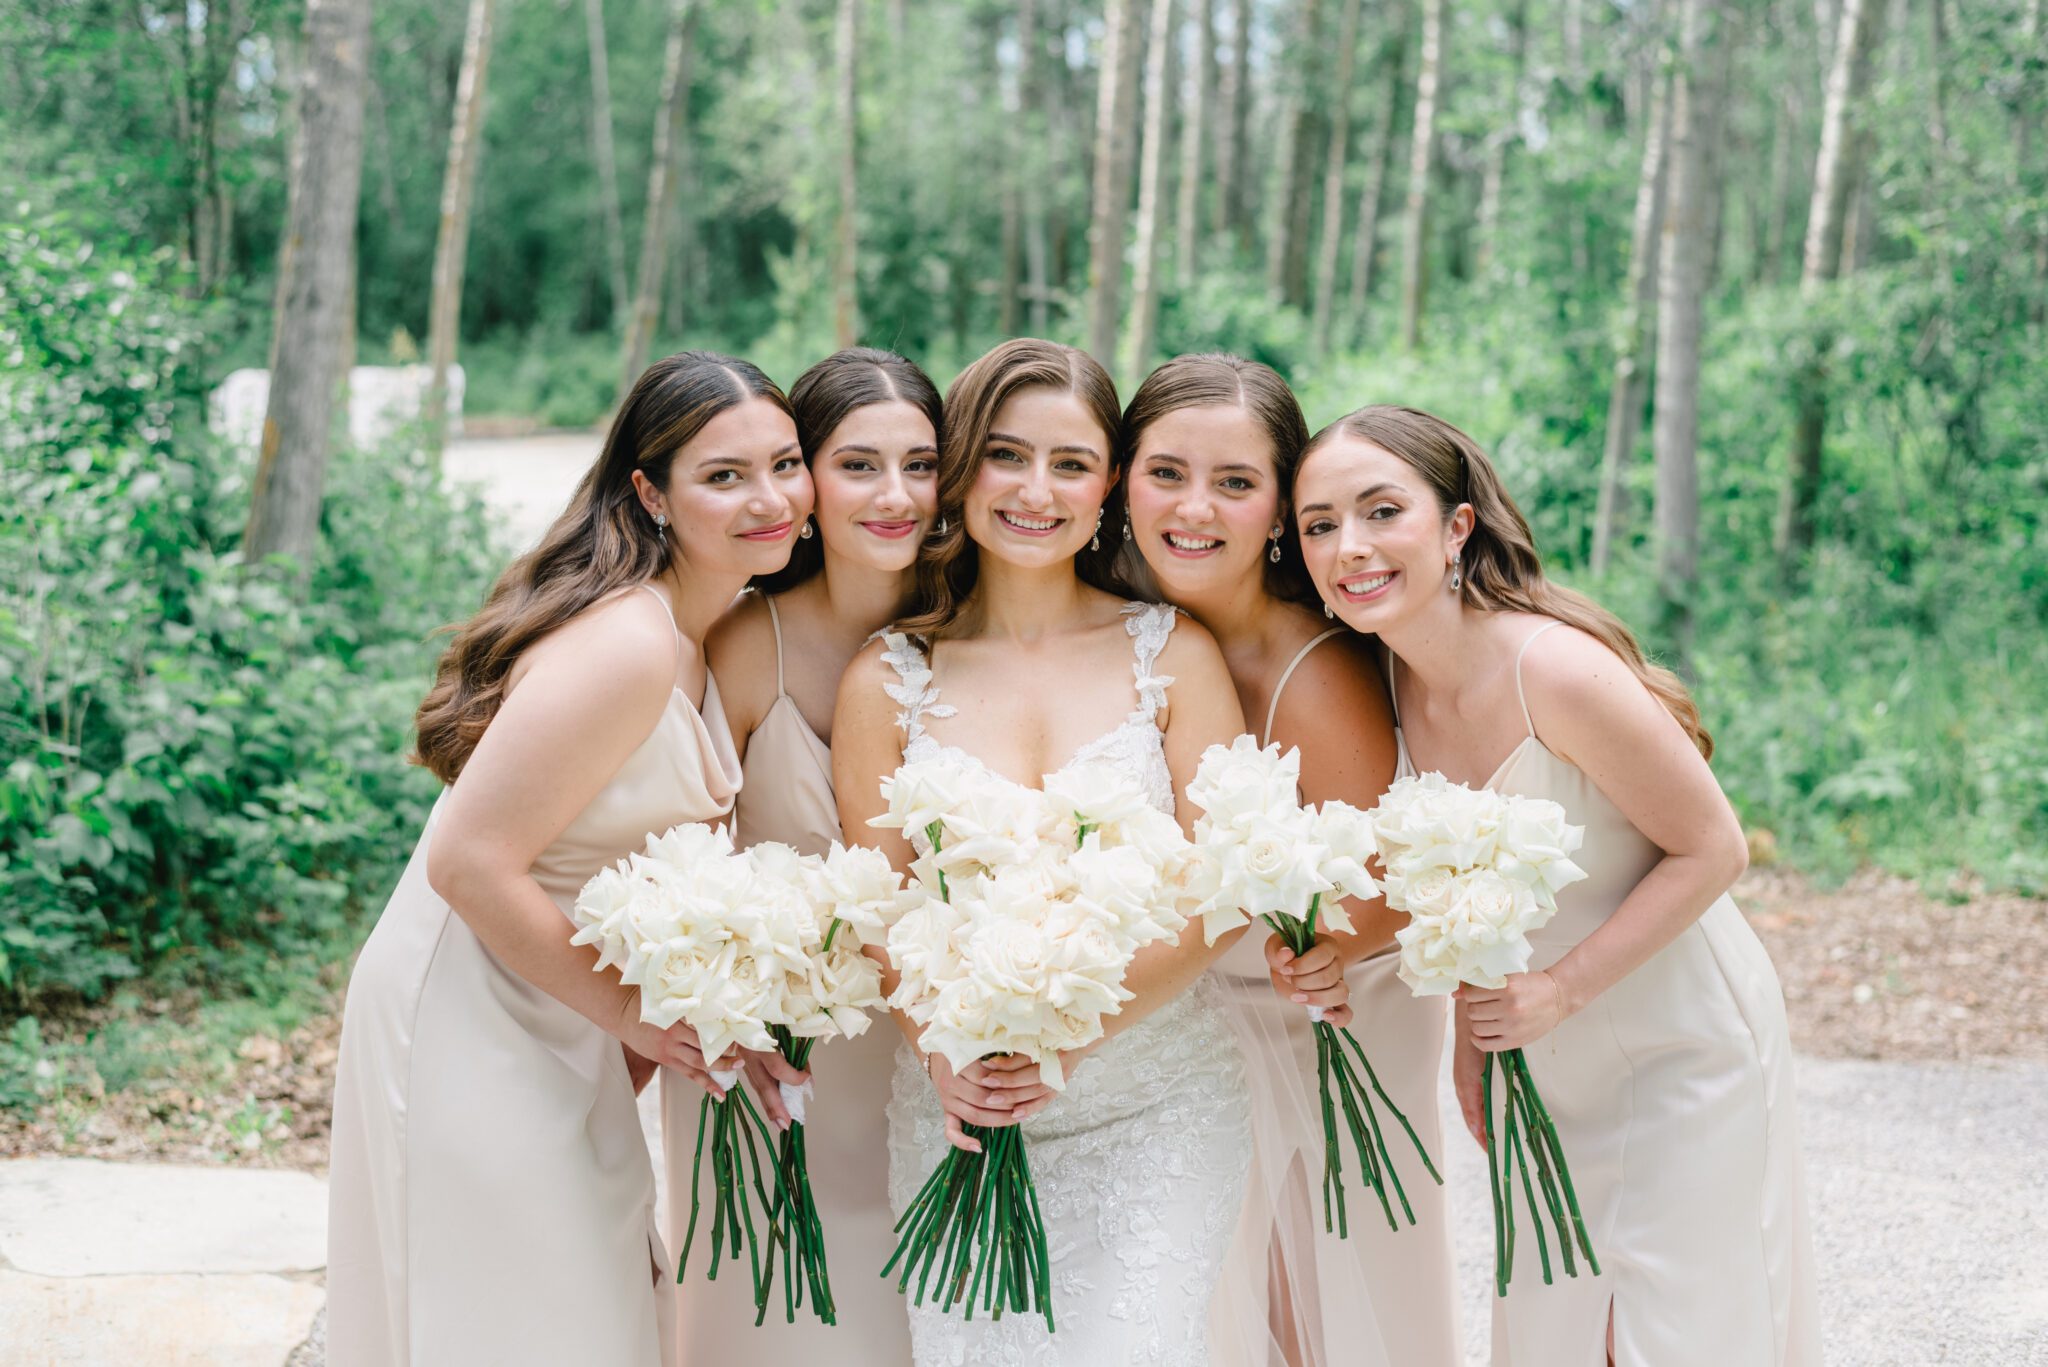 Elegant wedding at Sparrow Lane Events in Alberta. Bride surrounded by bridesmaids. Classic colour palette of white, blush, and green wedding inspiration. Timeless Summer Wedding.